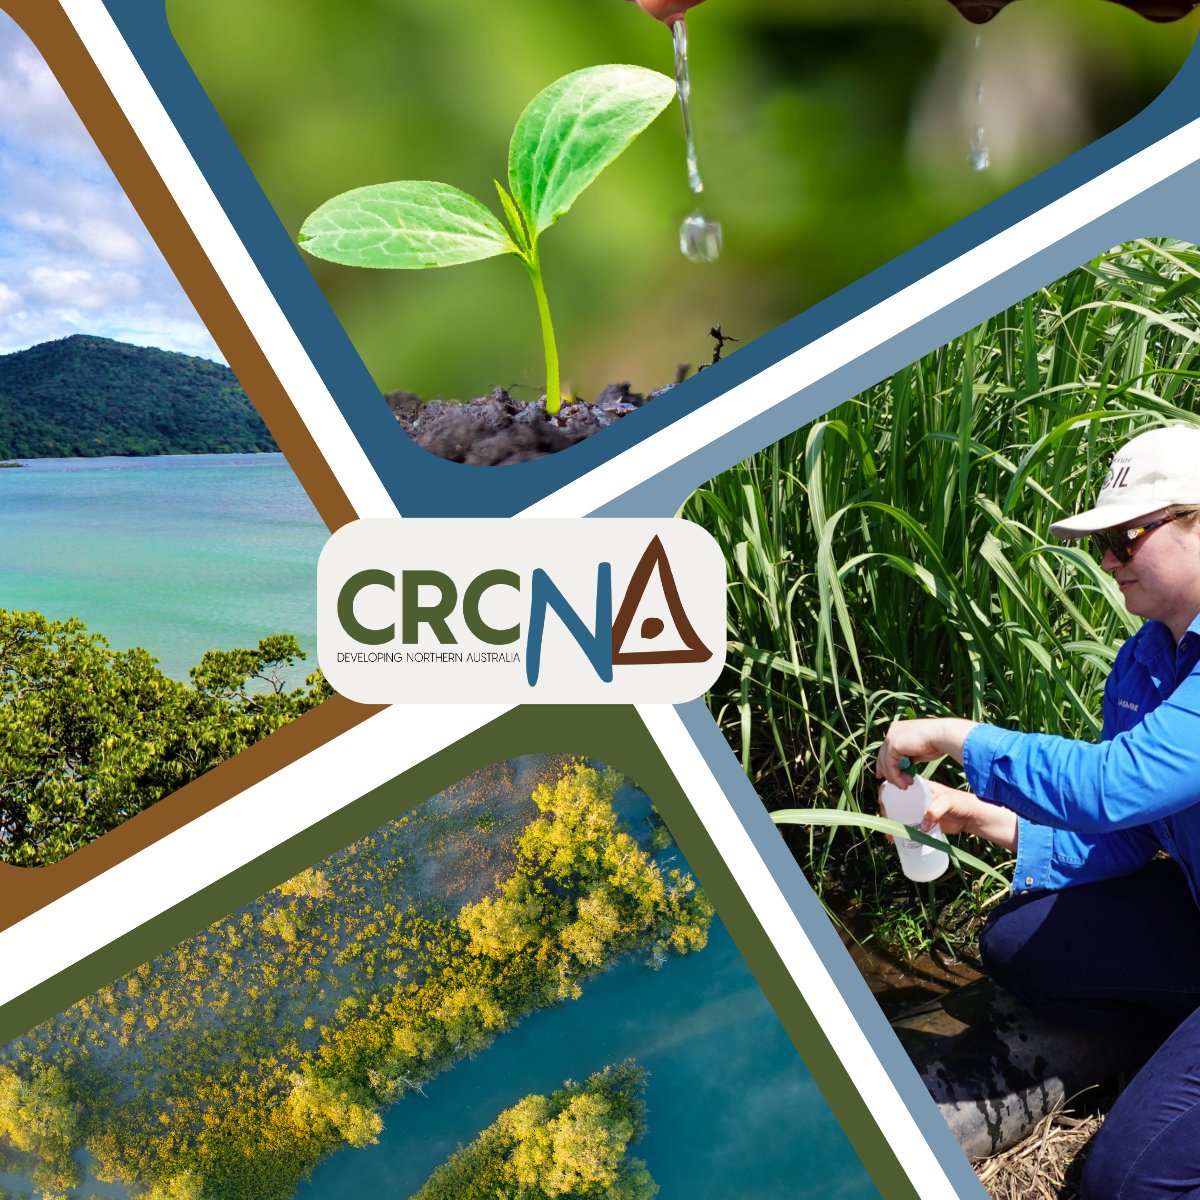 Happy World Water Day! 💦 We're committed to sustainable water development for #NorthernAustralia that's #naturepositive and #inclusive of #FirstNations and land owners needs. #CRCNA water programs: Making Water Work + Water Security for Northern Australia💦 #worldwaterday